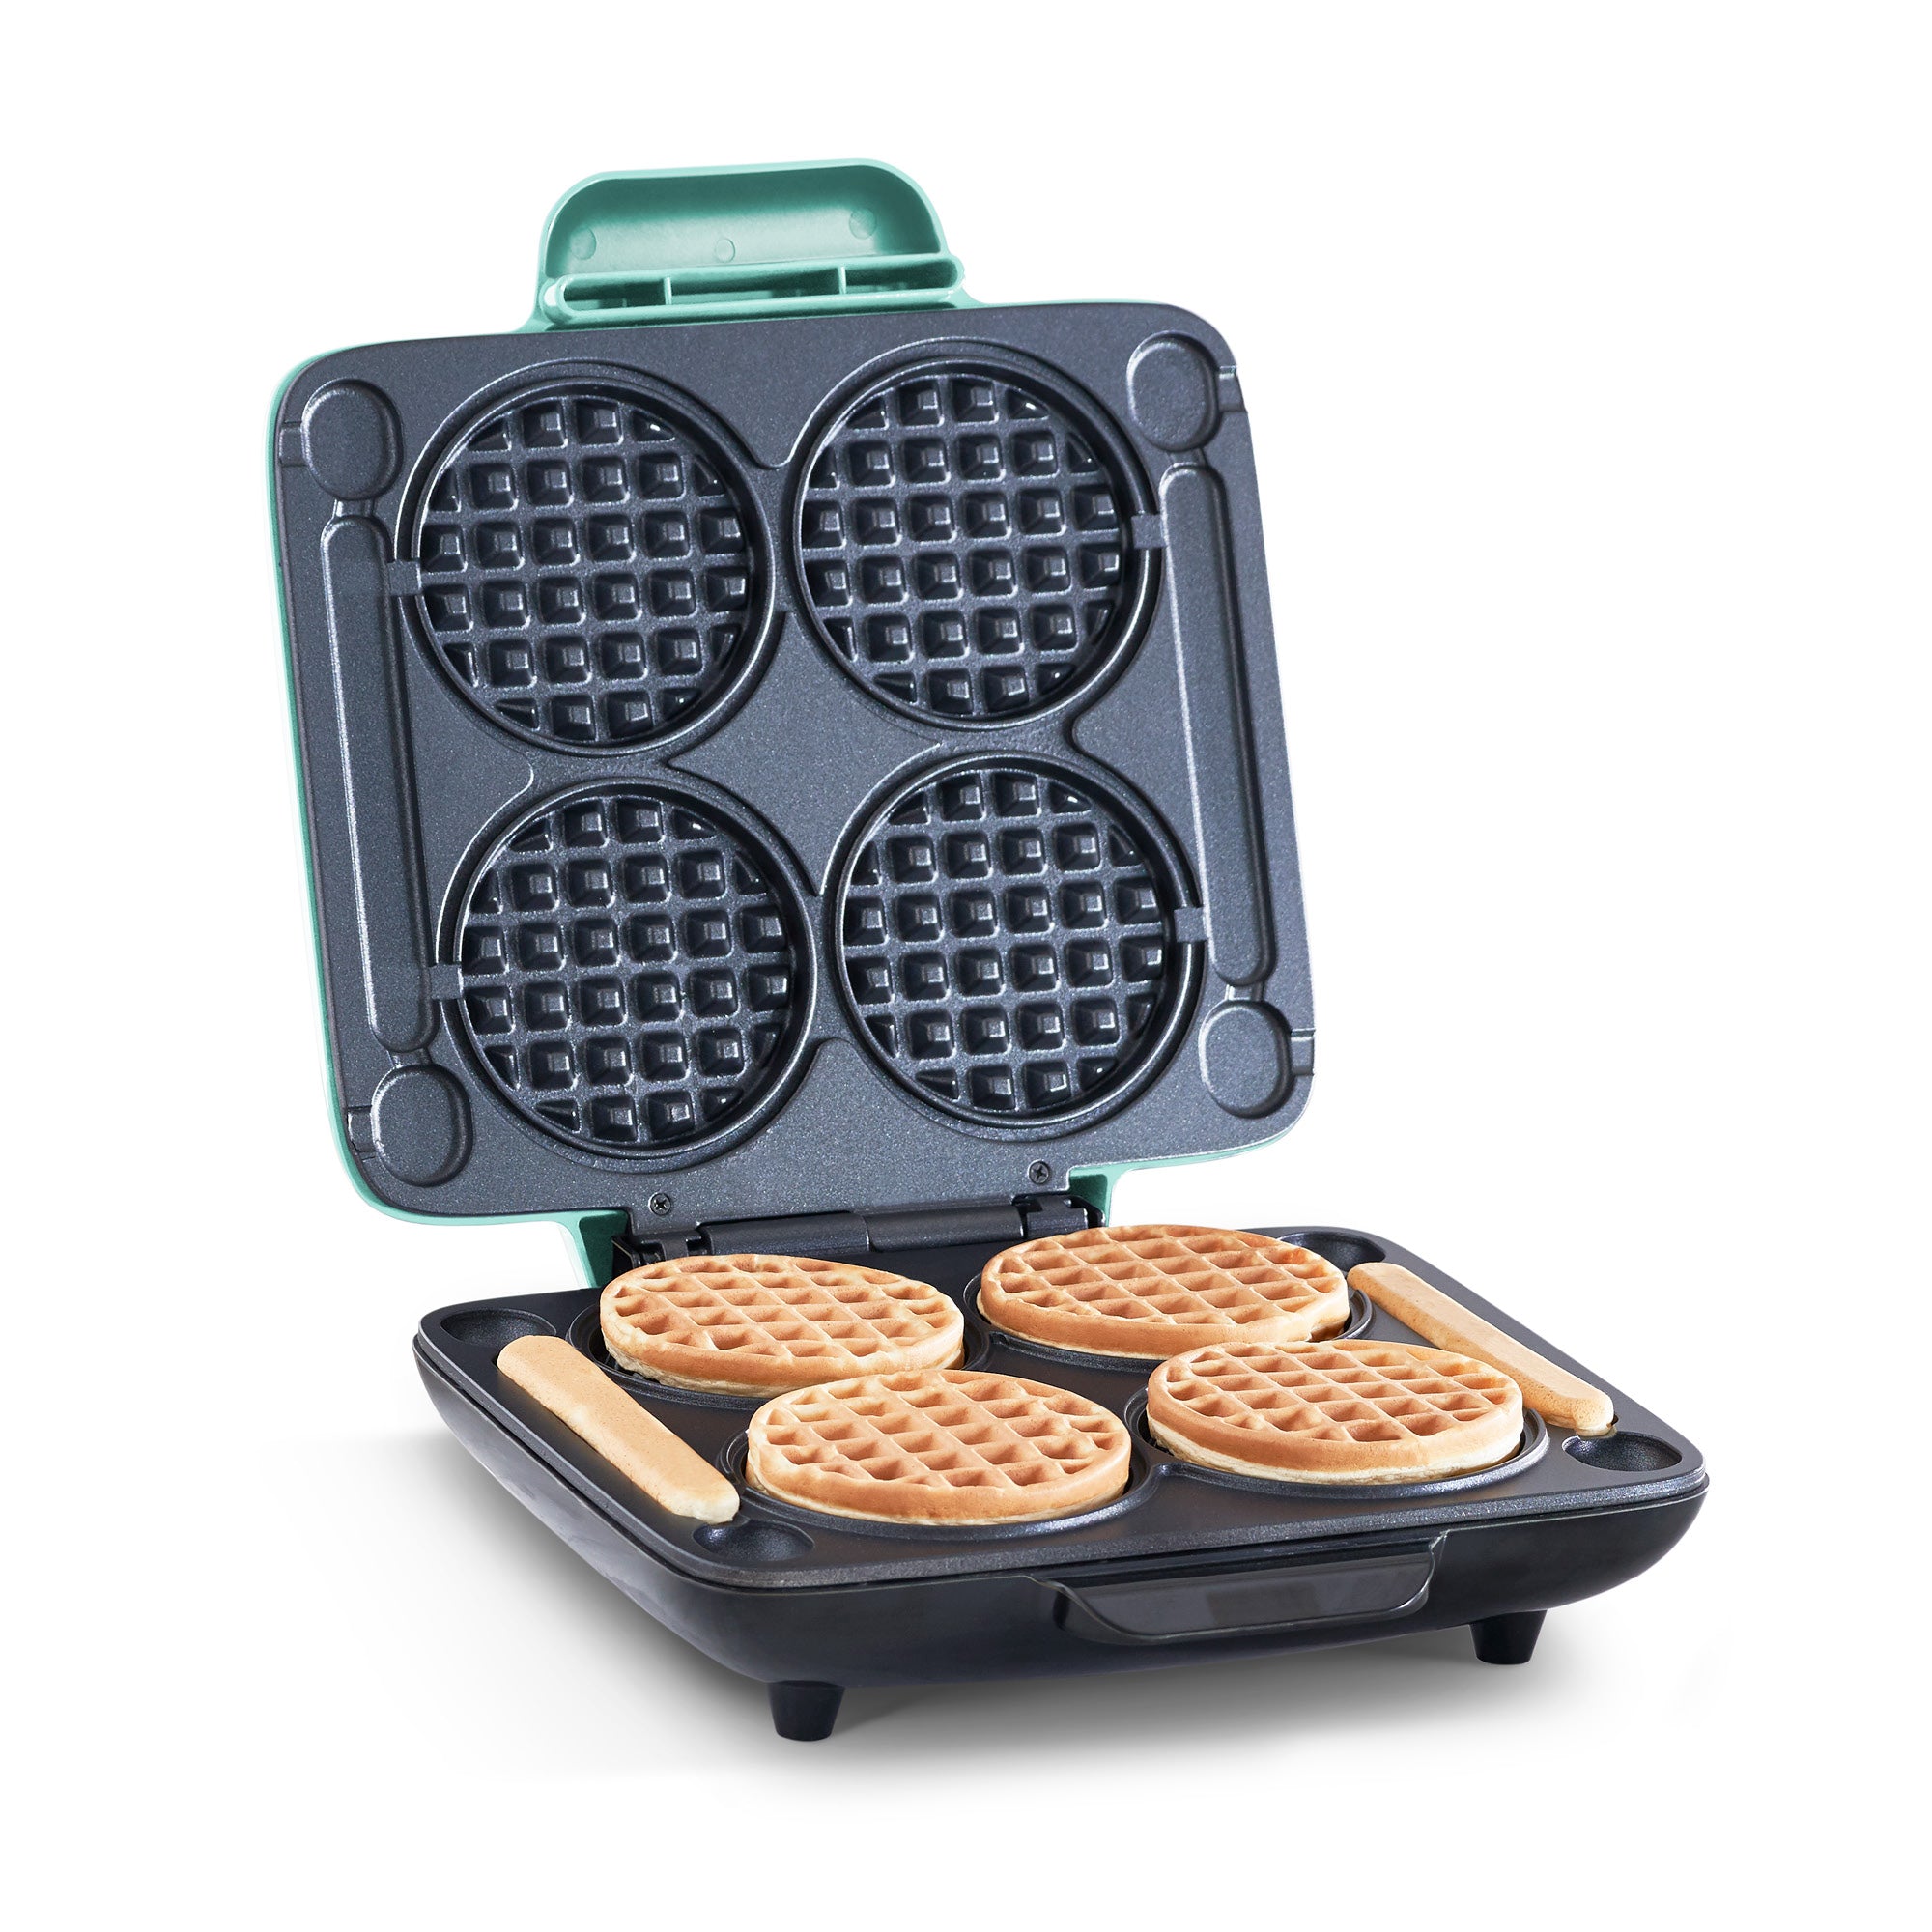 Rise by Dash 4 In. Red Mini Waffle Maker - Power Townsend Company